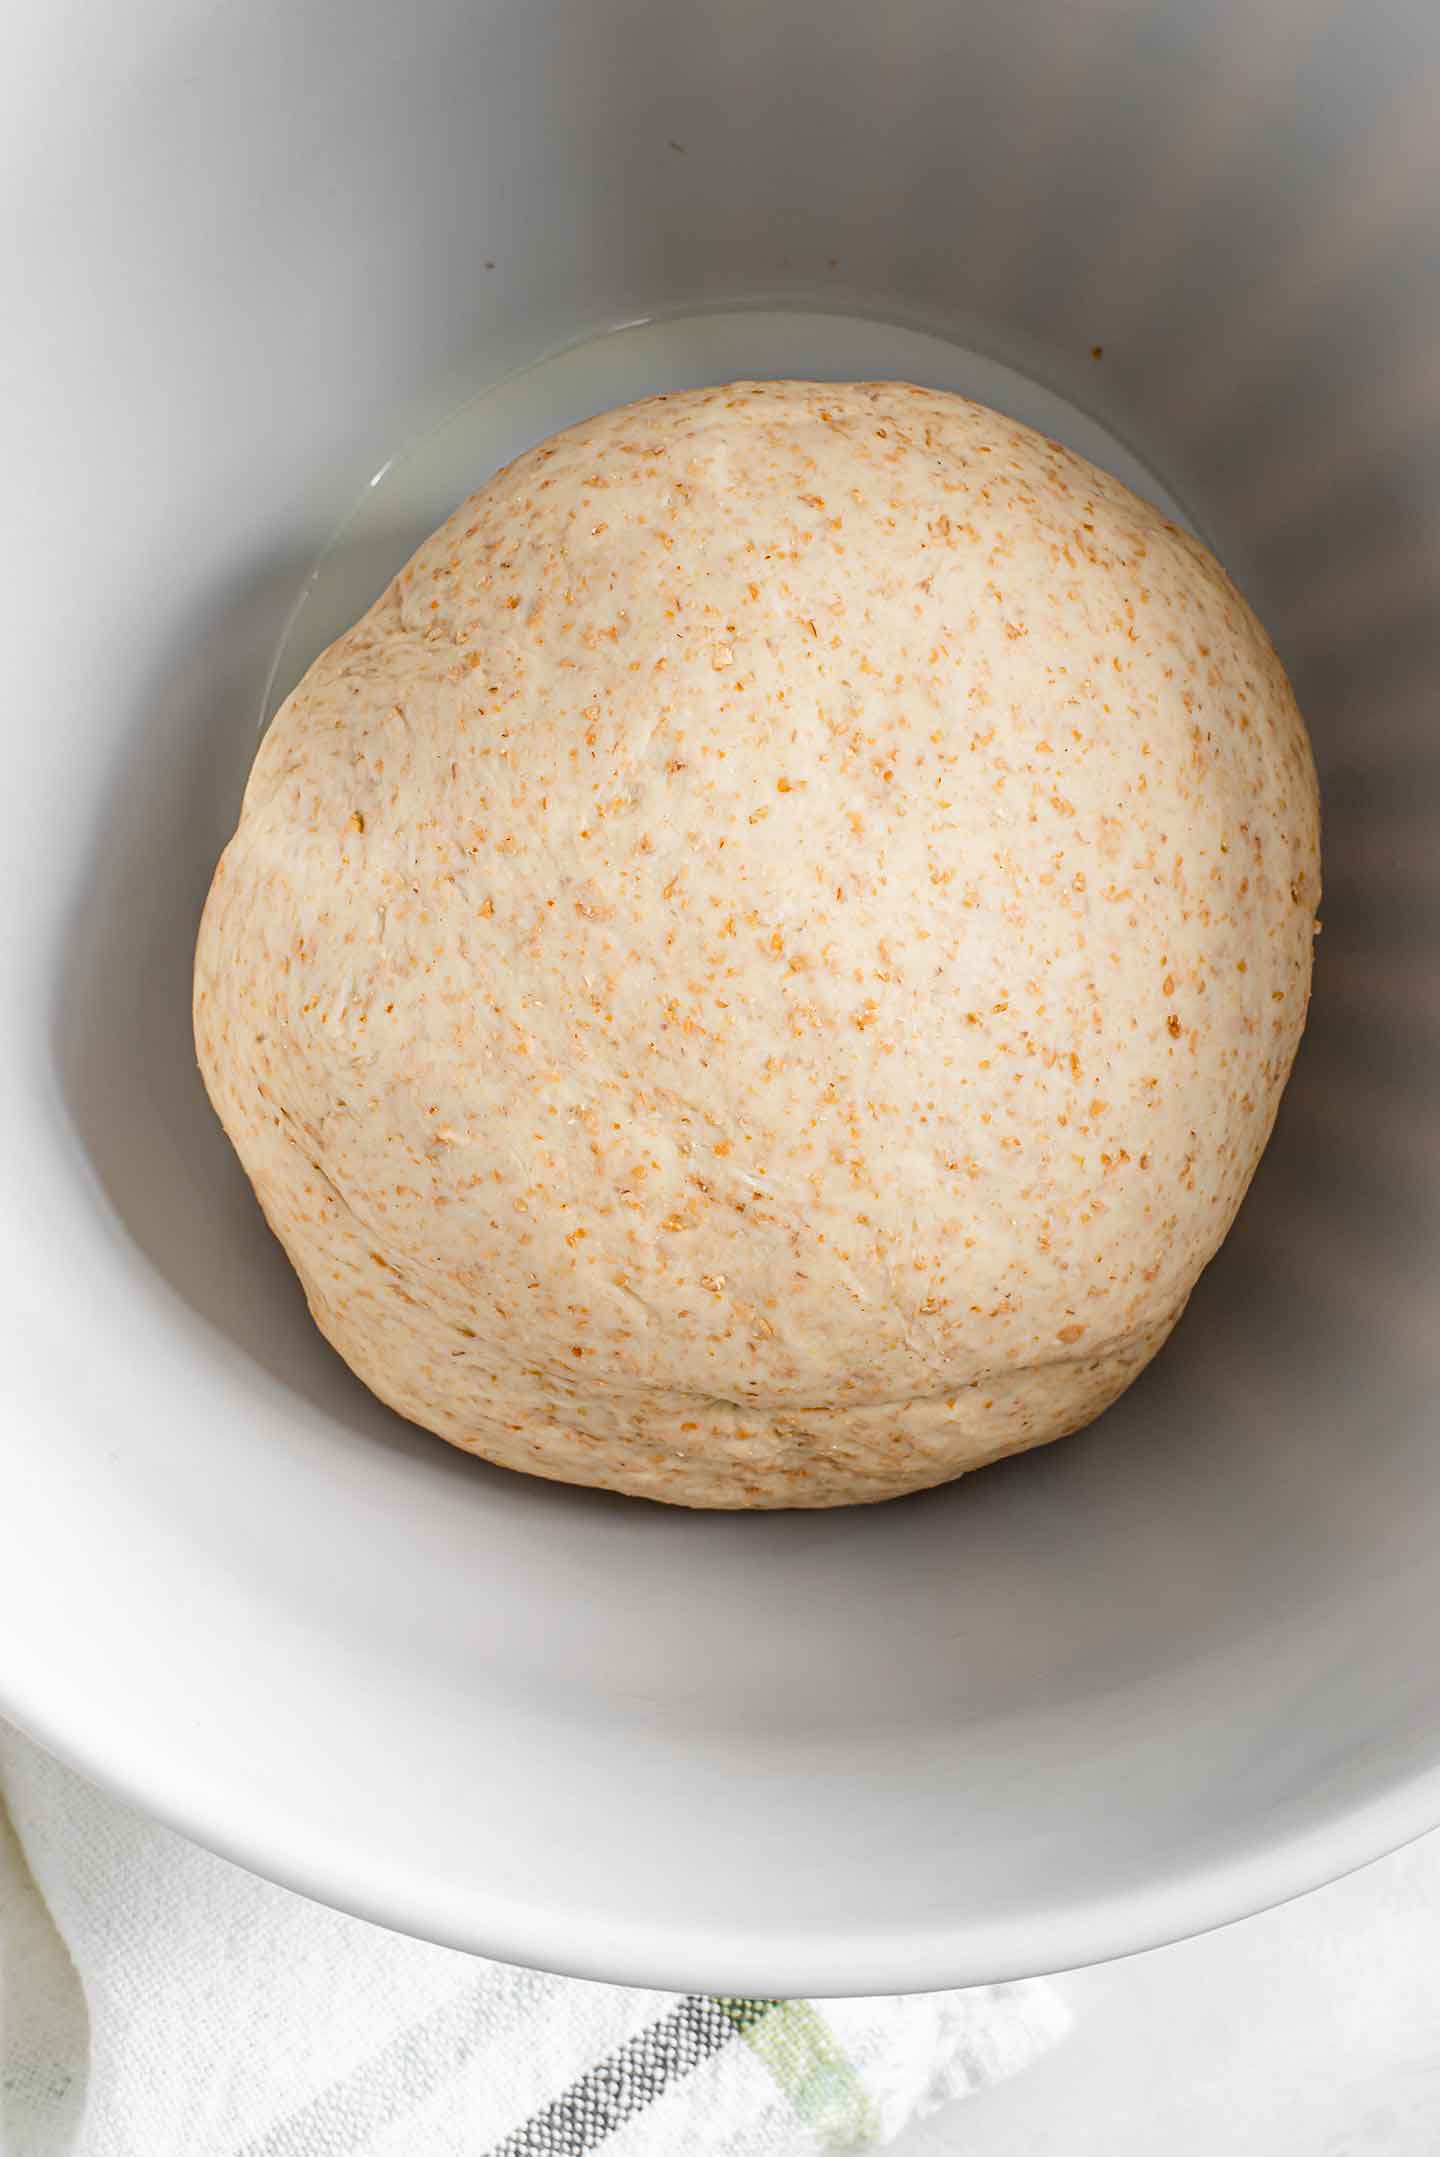 Top down view of a formed ball of our easy pizza dough recipe in a lightly oiled bowl.